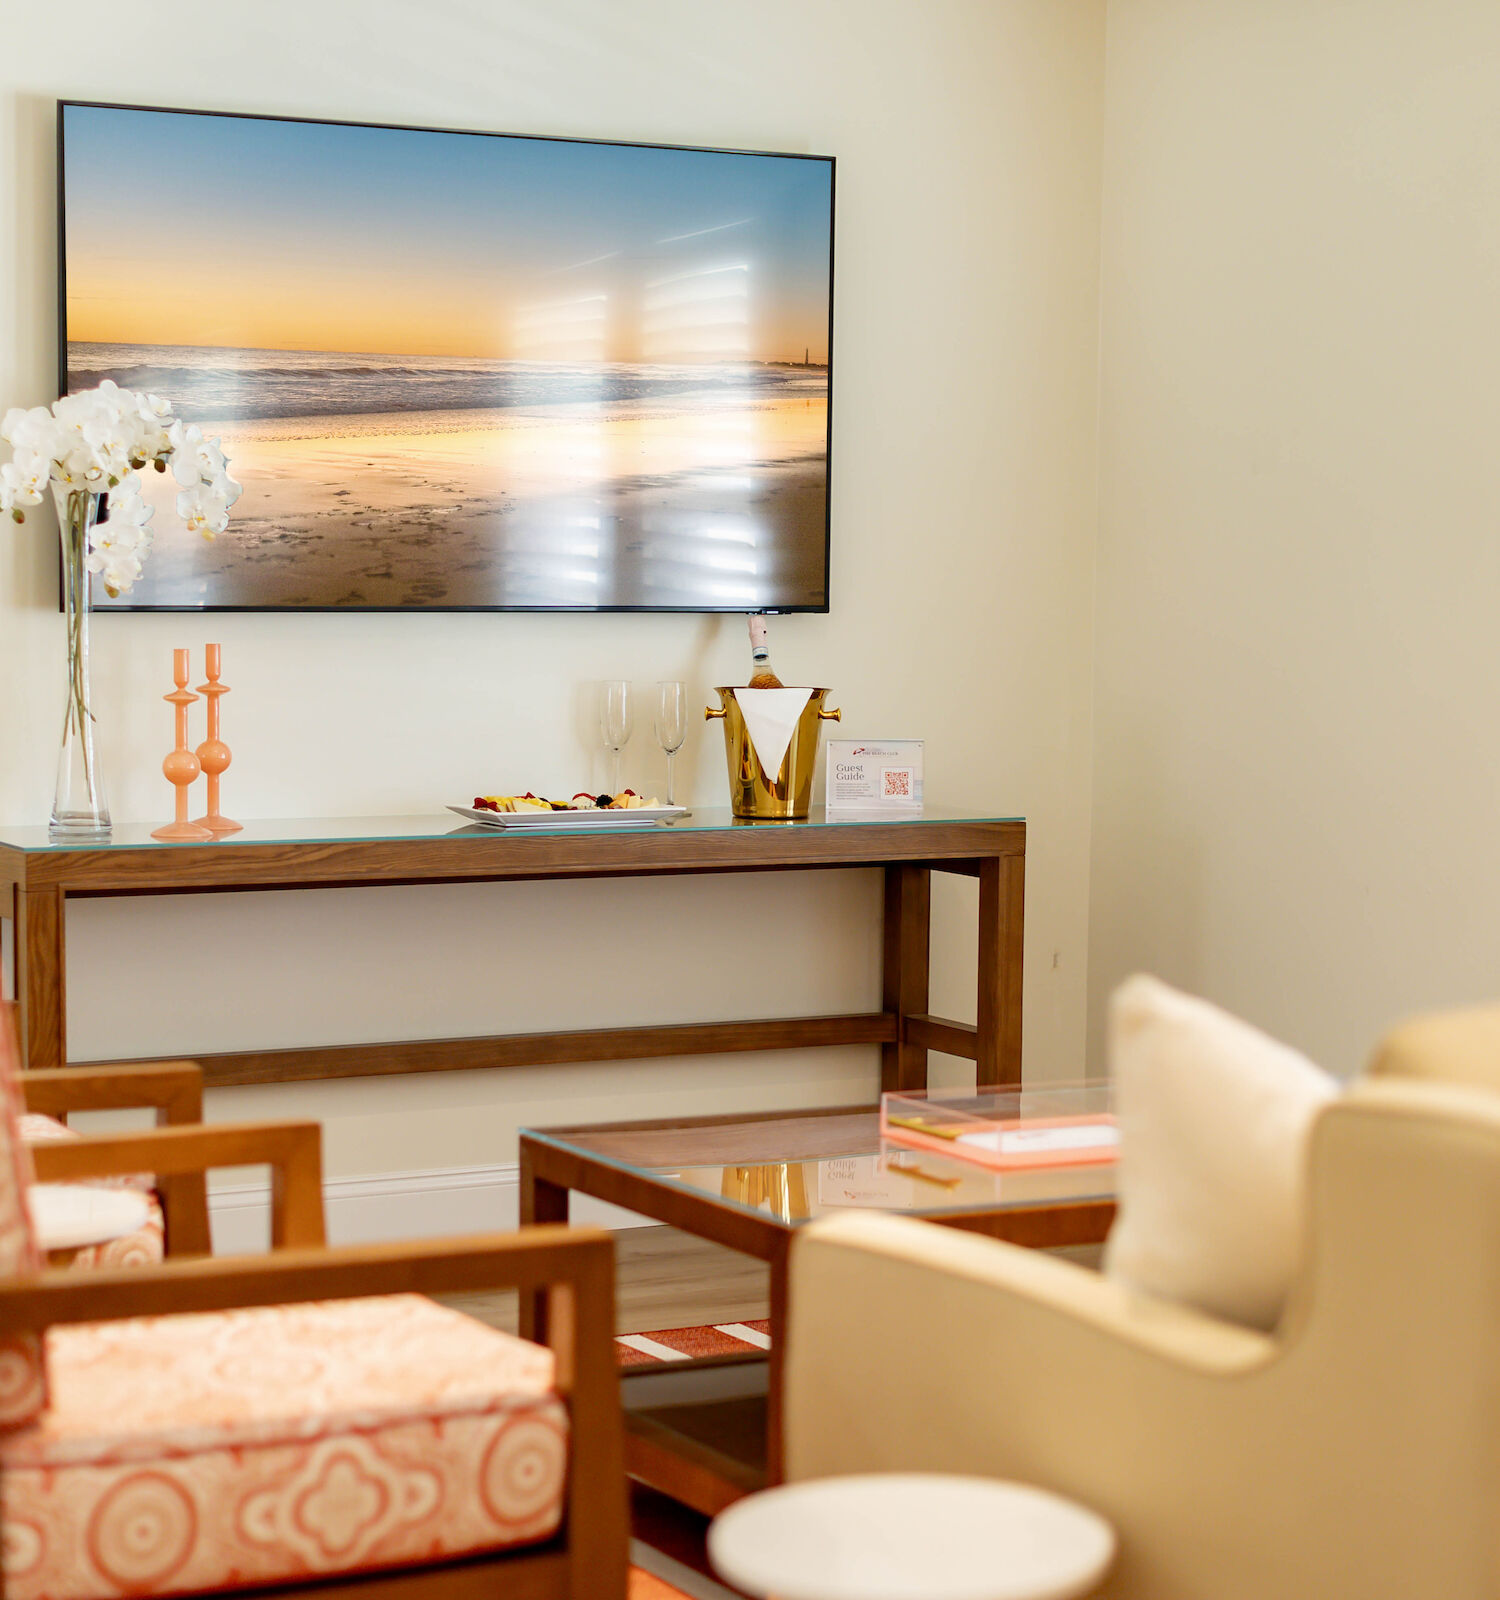 A cozy living room with a wall-mounted TV displaying a beach scene, comfortable chairs, a couch, table, and a console with decor items.